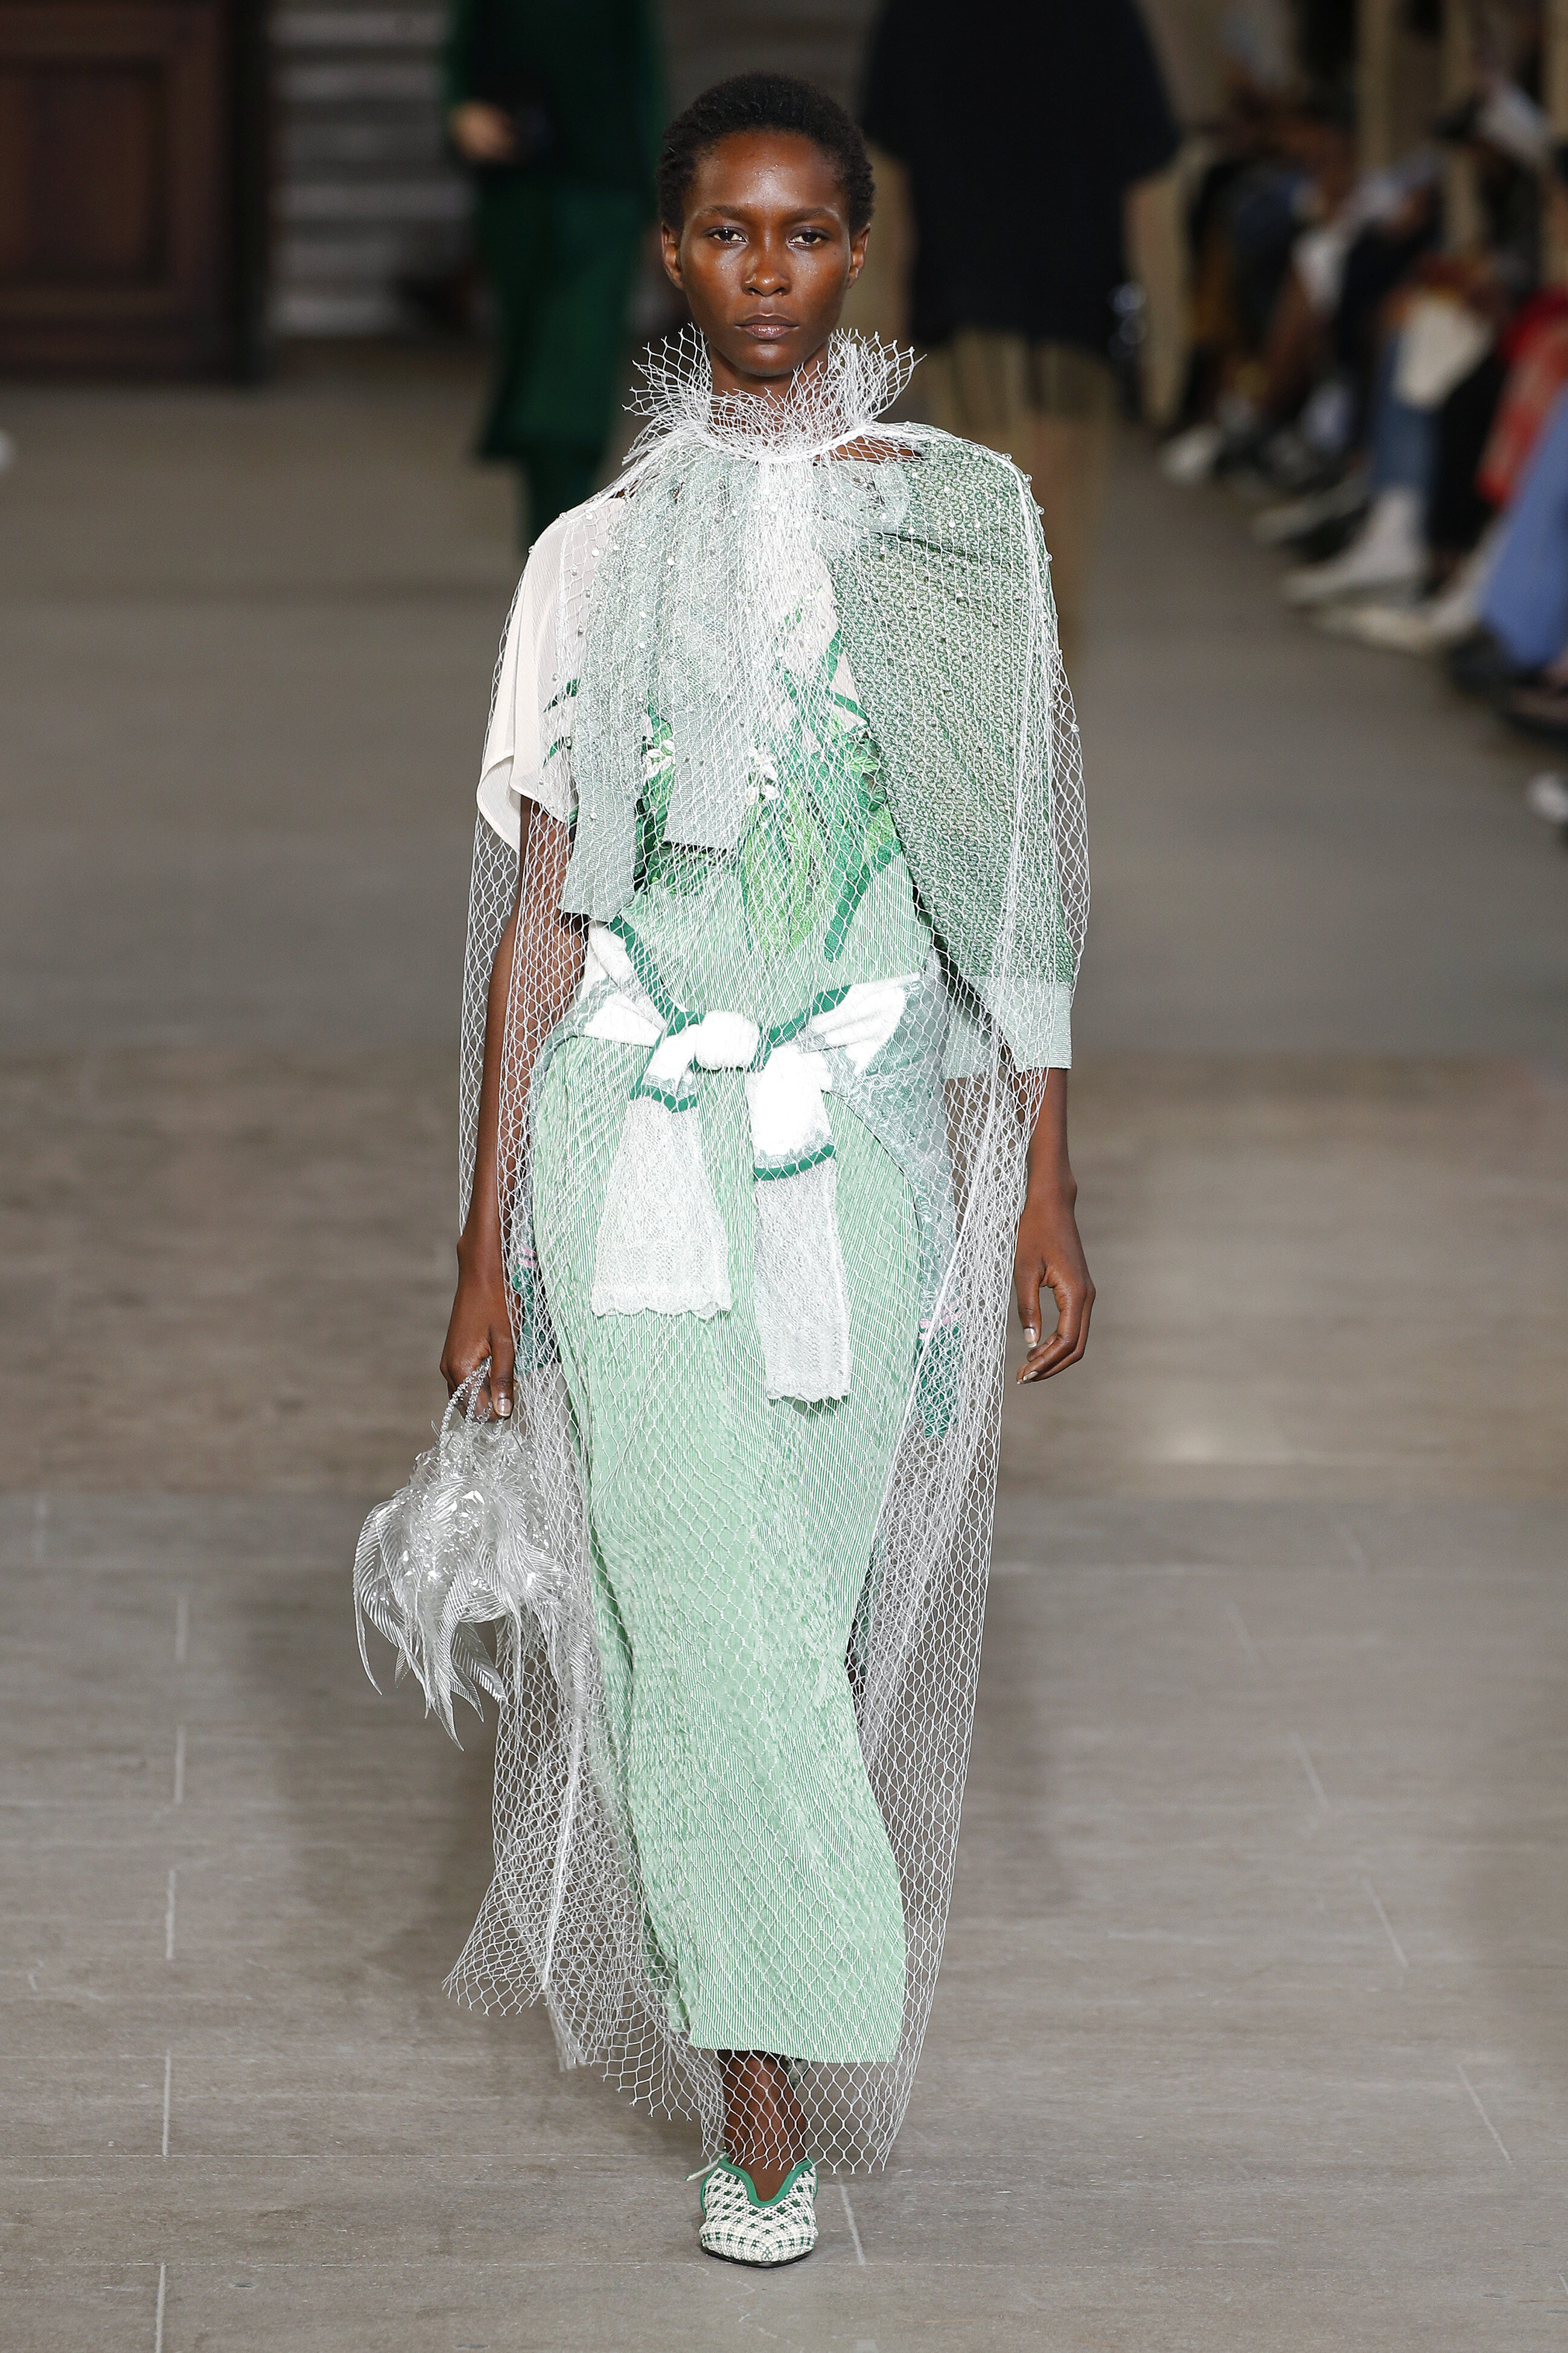 Viktor & Rolf Spring 2023 Proves There Are Many Ways to Wear a Ballgown -  Fashionista